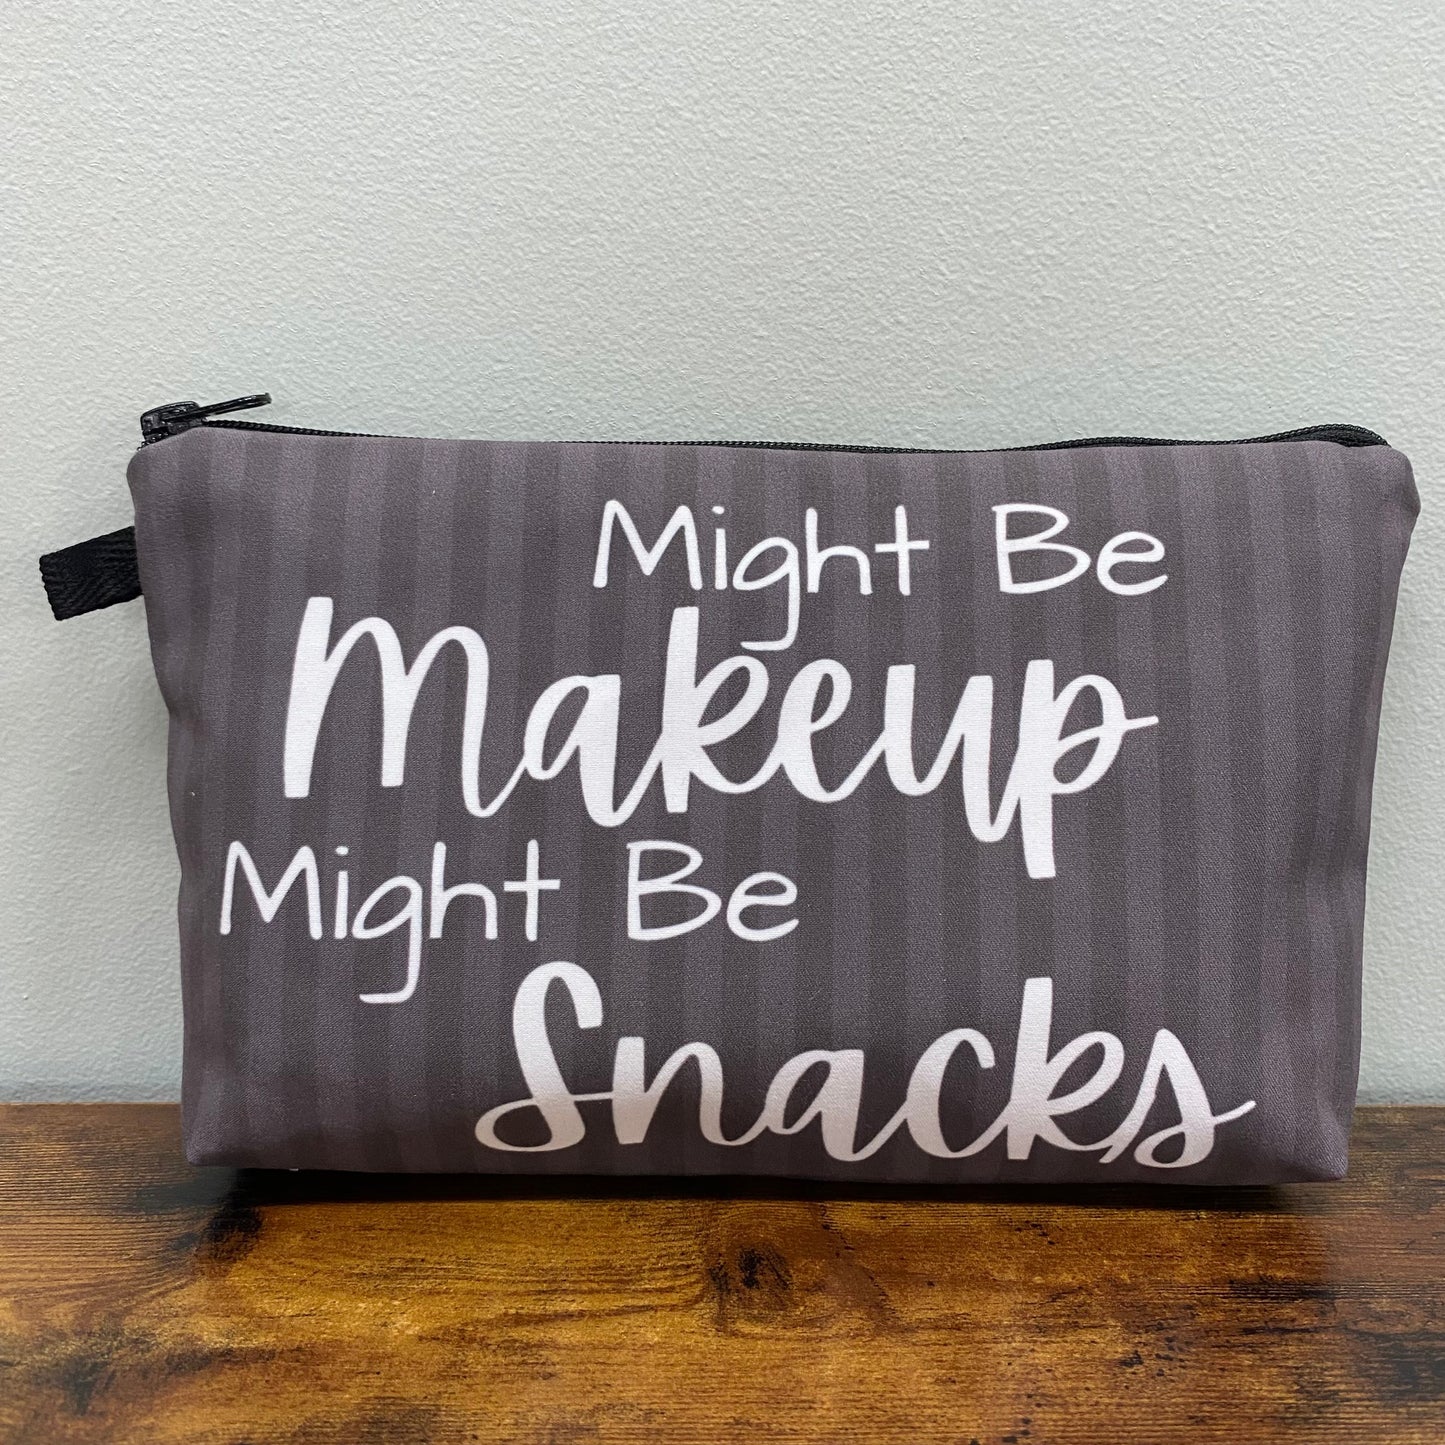 Might Be Makeup - Water-Resistant Multi-Use Pouch